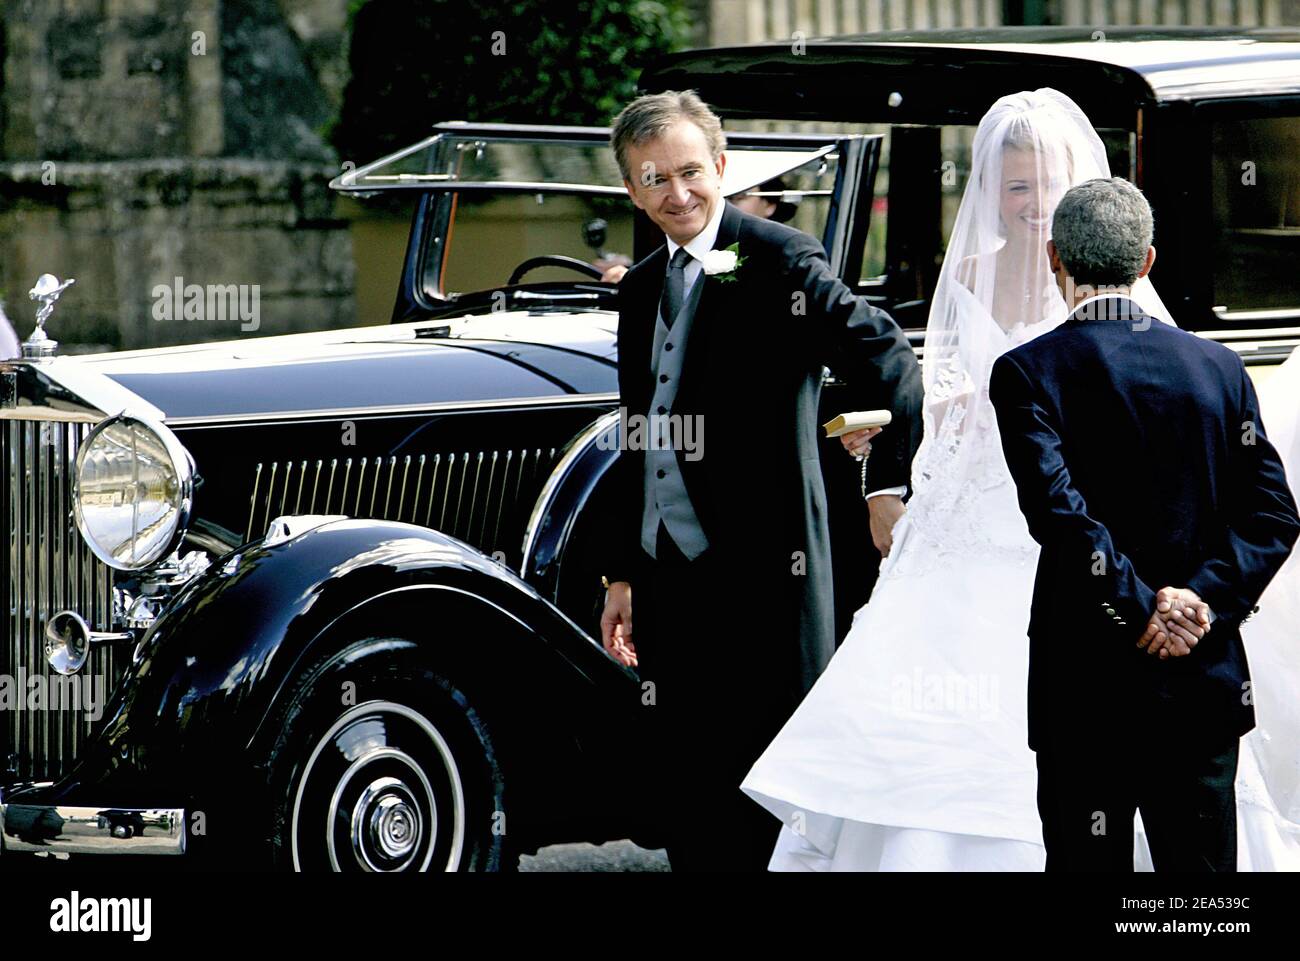 Wedding of Delphine Arnault and Alessandro Gancia in Bazas, South West of  France on September 17, 2005. Her father Bernard Arnault, C.E.O of LVMH  Empire and his wife Helene Mercier Arnault attend